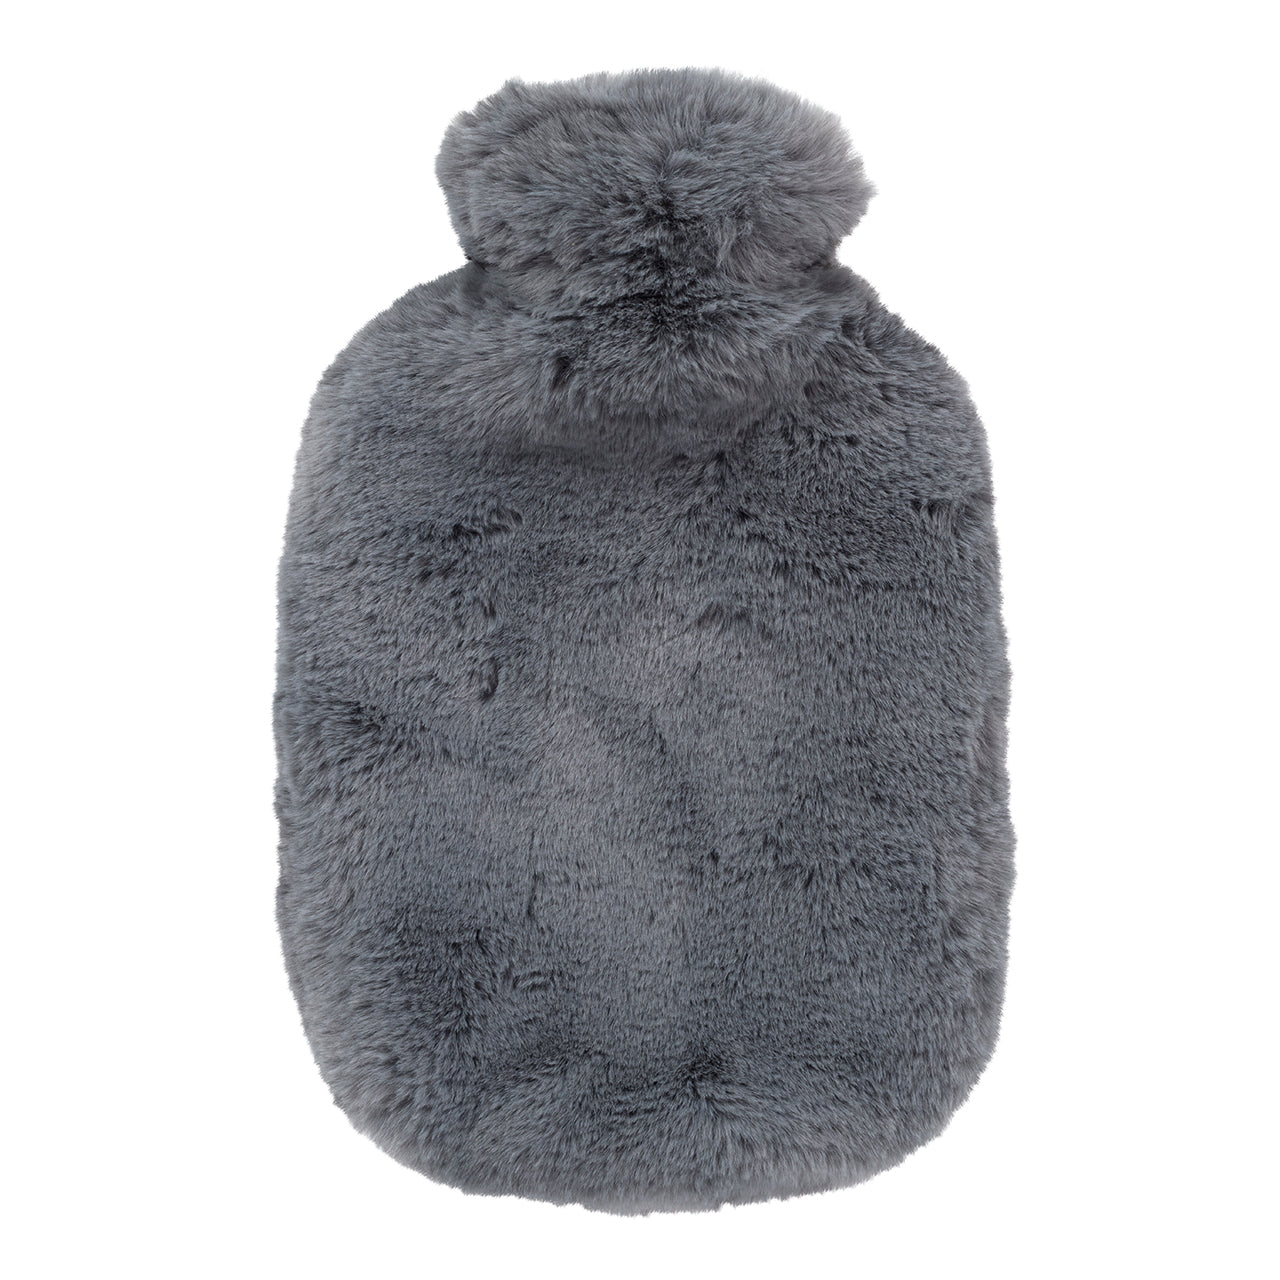 2 Litre Fashy Hot Water Bottle with Ocean Grey Extra Soft Plush Cover